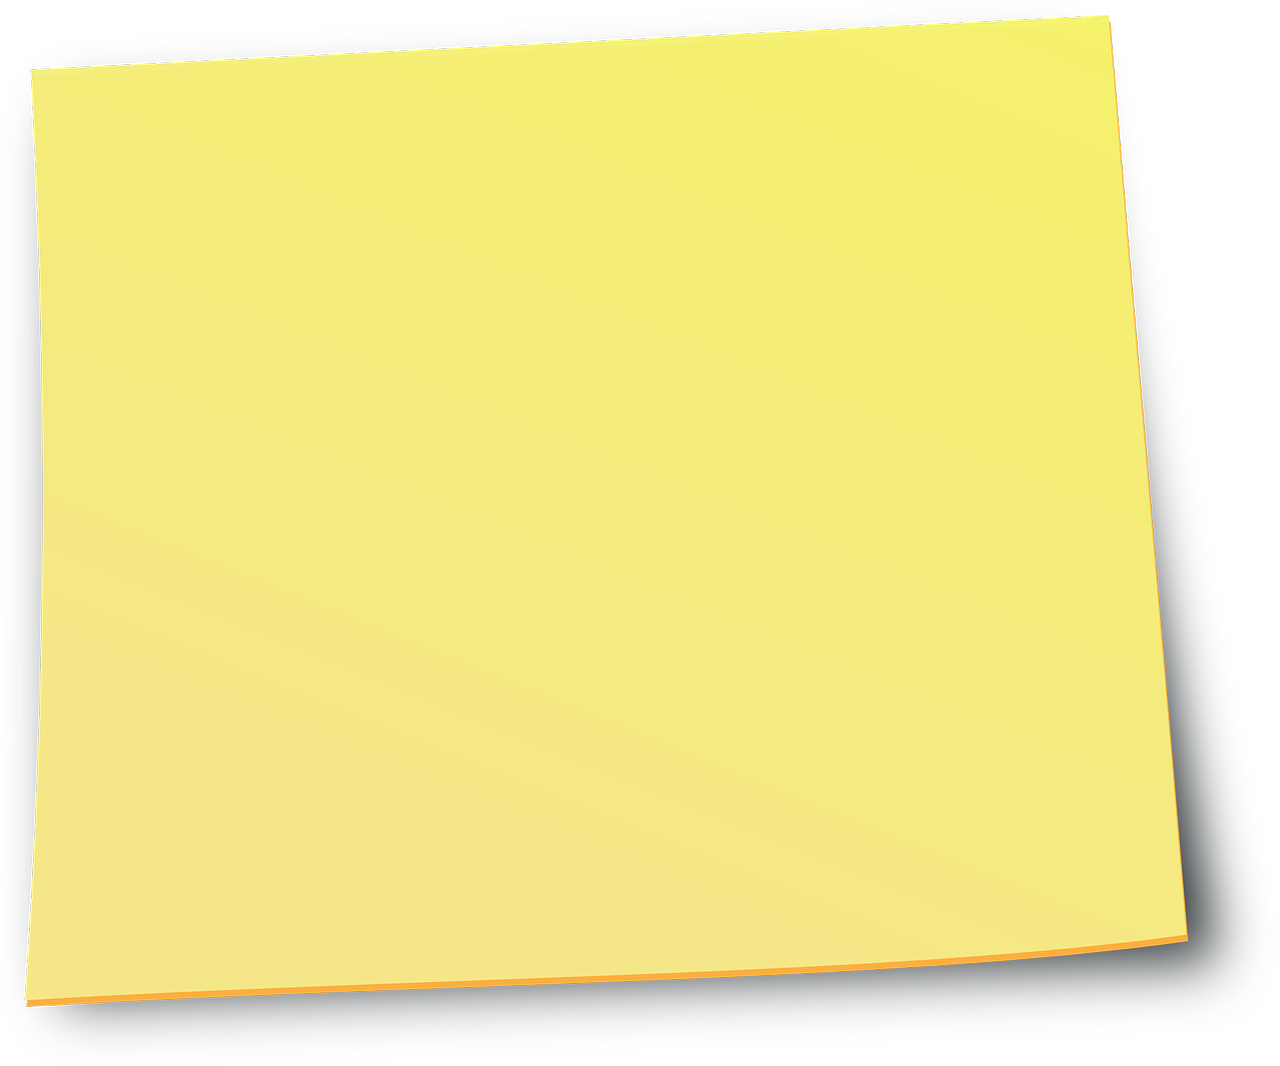 a piece of yellow paper sitting on top of a binder, computer art, black, clip art, story board format, side angle